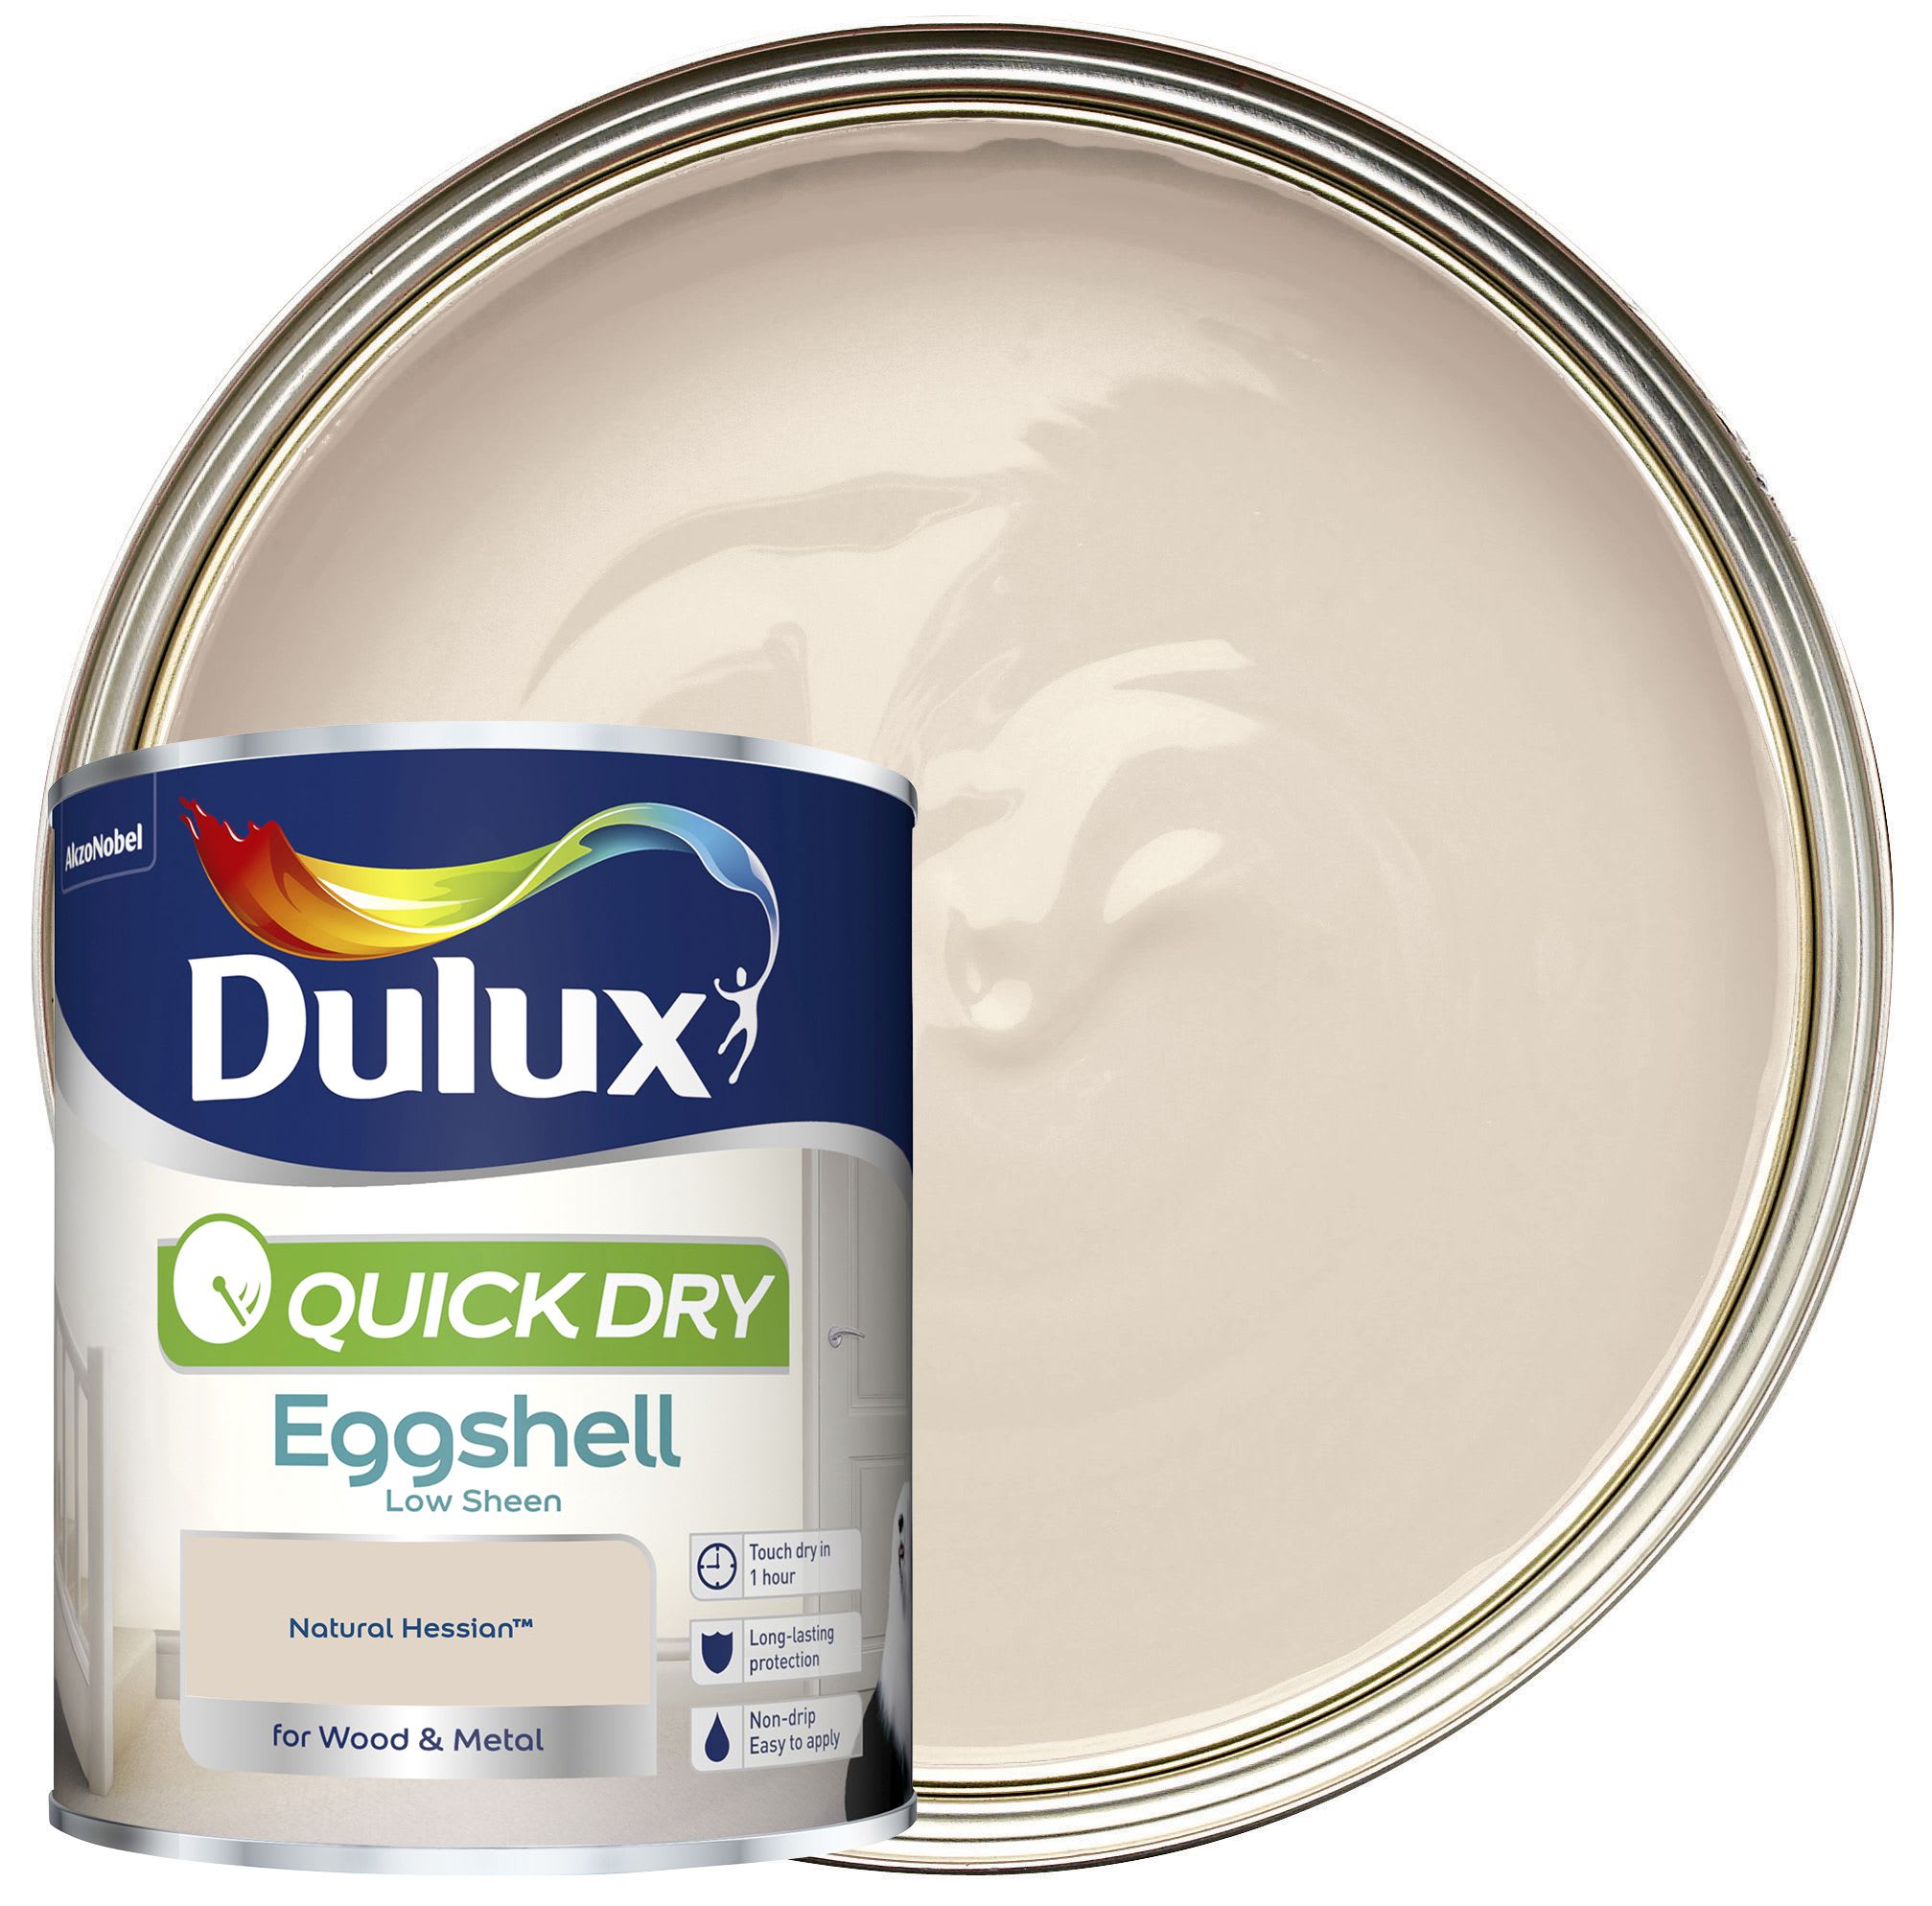 Dulux Quick Drying Eggshell Paint - Natural Hessian